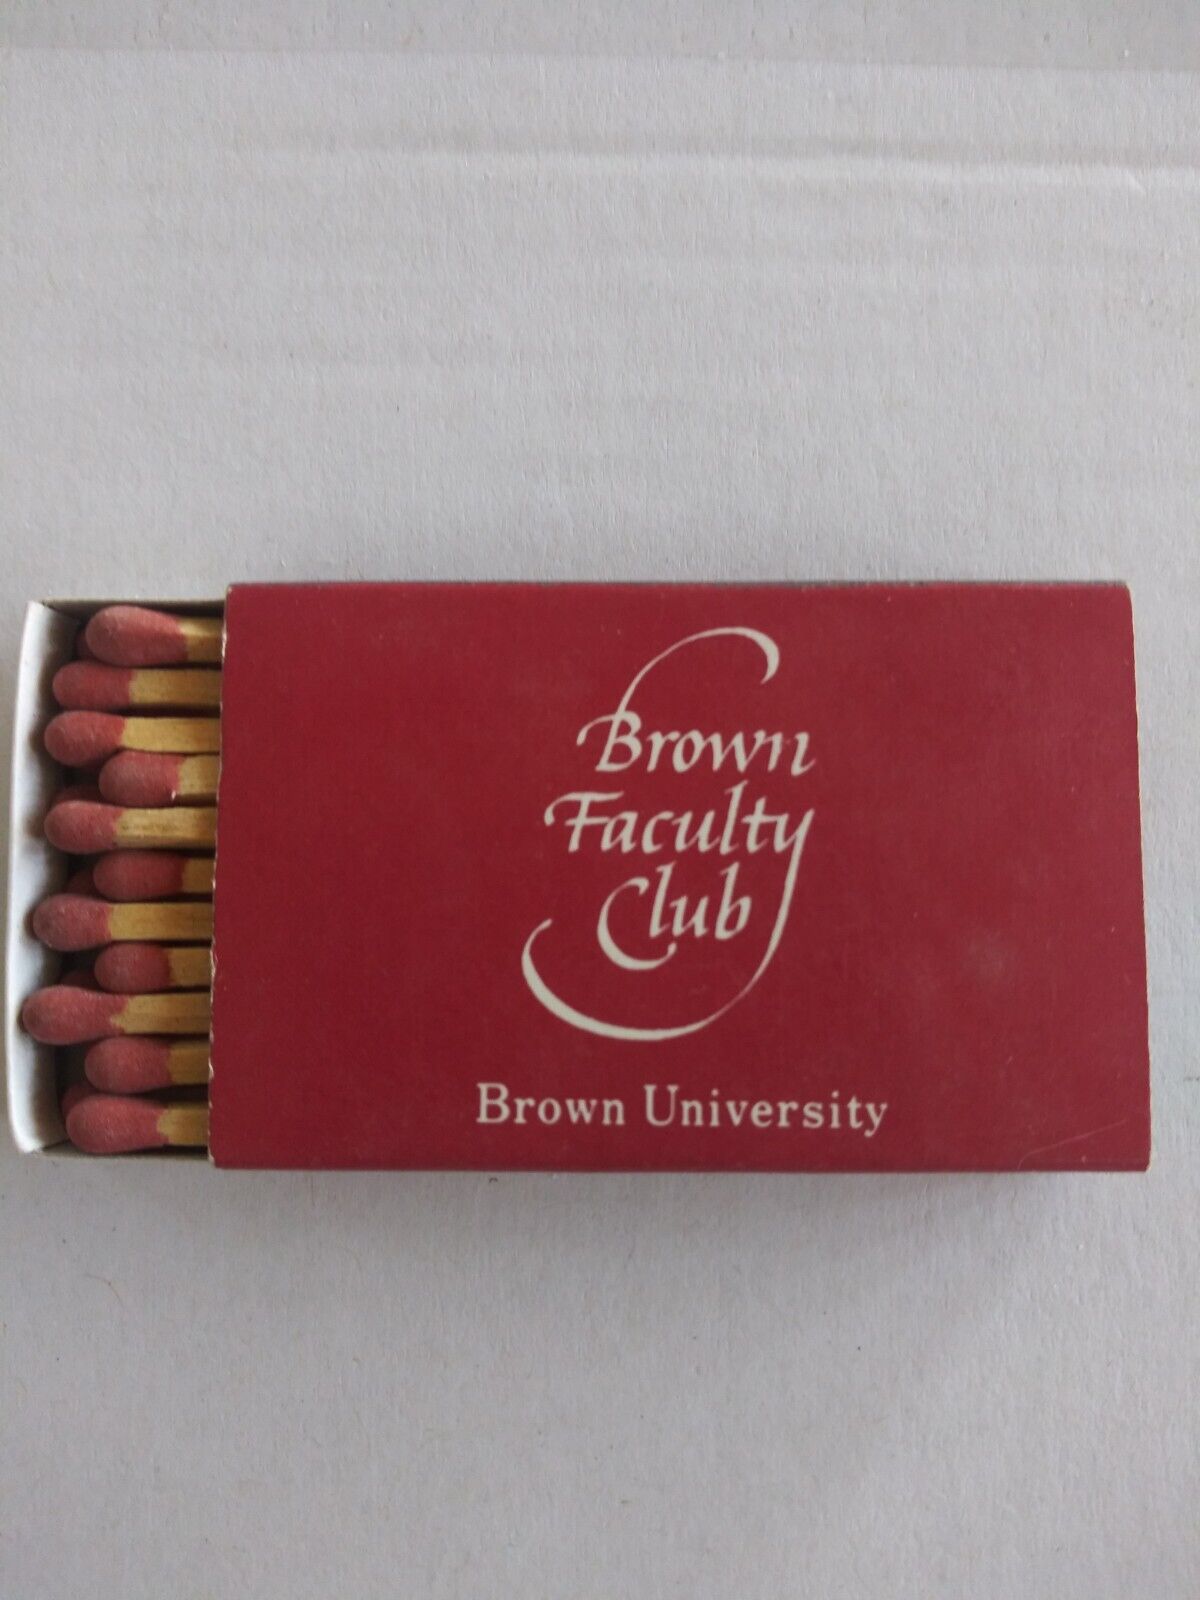 Vintage Wooden Matches From The Brown Faculty Club Brown University...